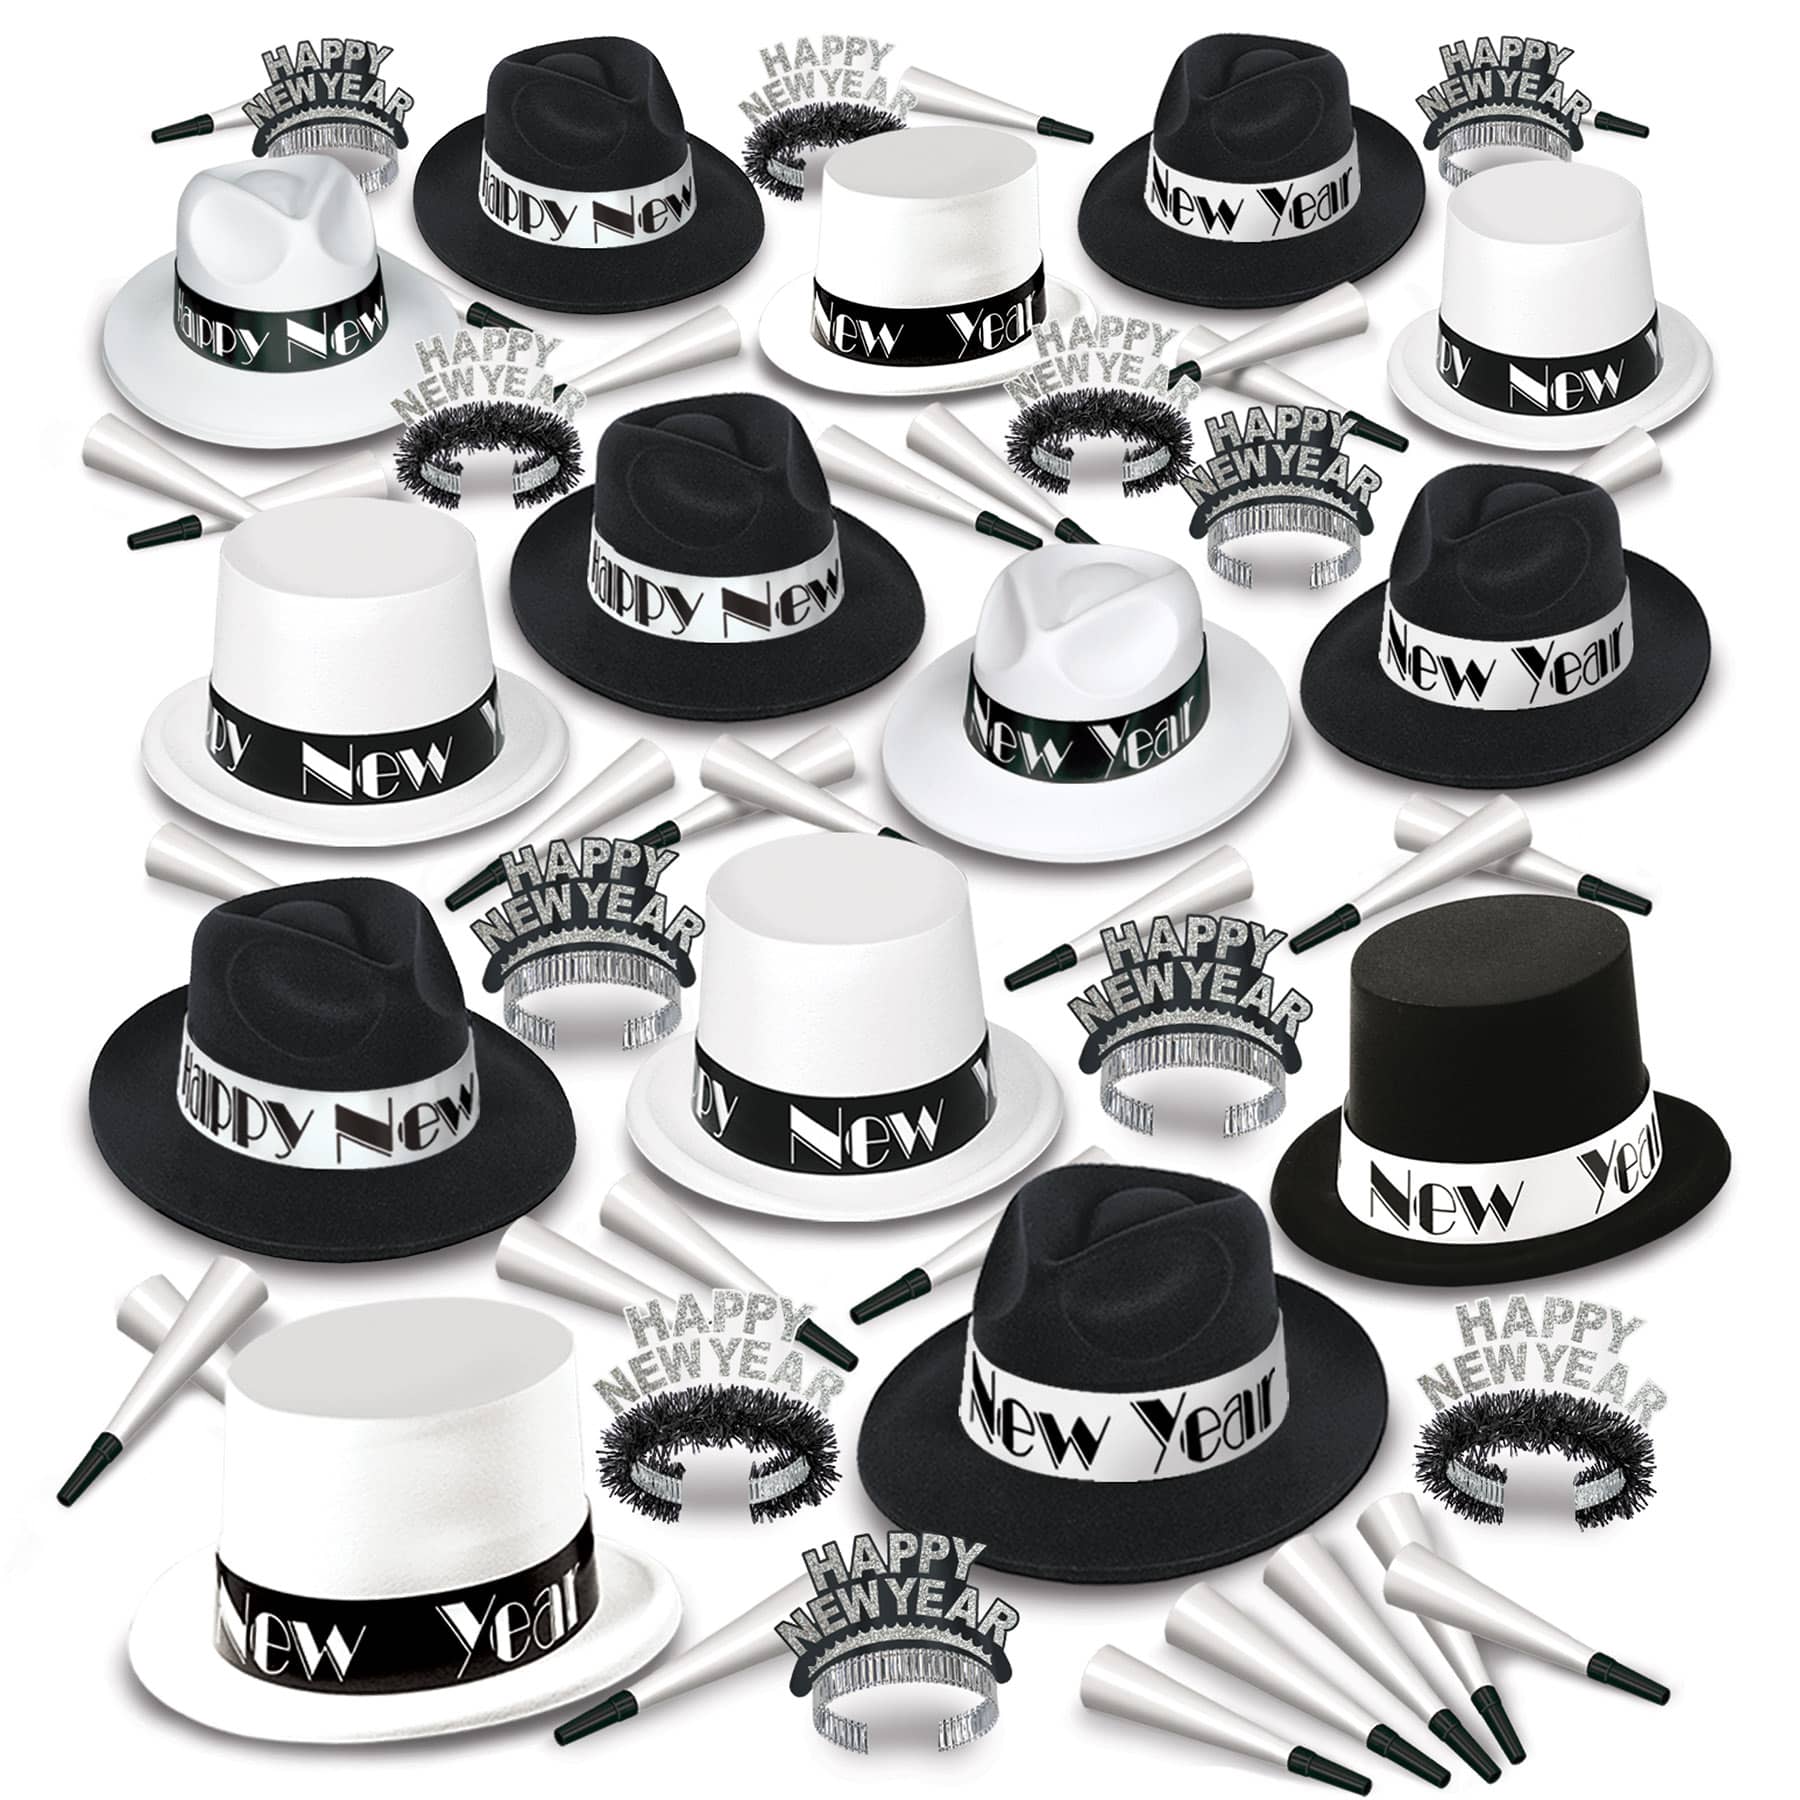 Roaring 20"s New Years Party Kit